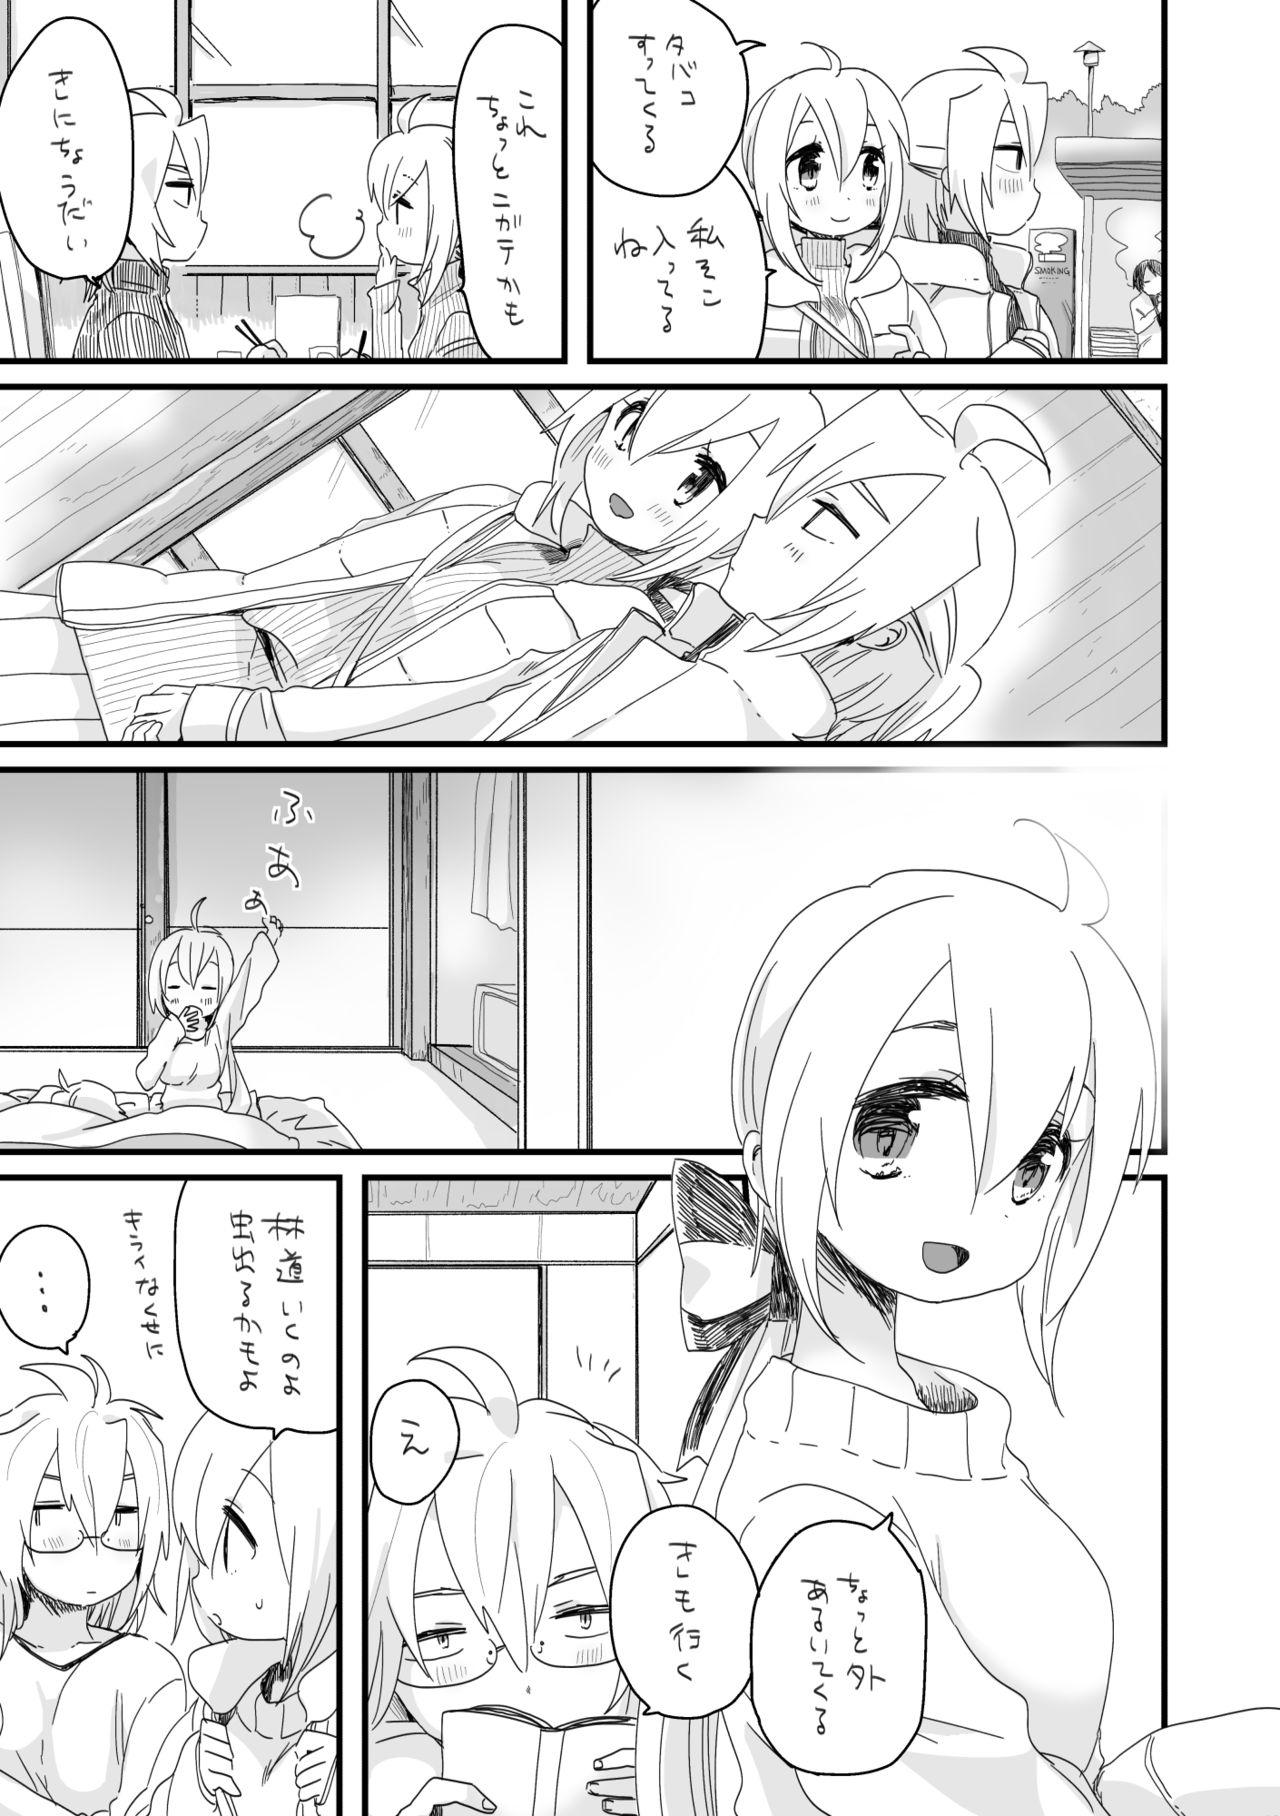 Tied 好きって言うだけ Cocksucking - Page 9